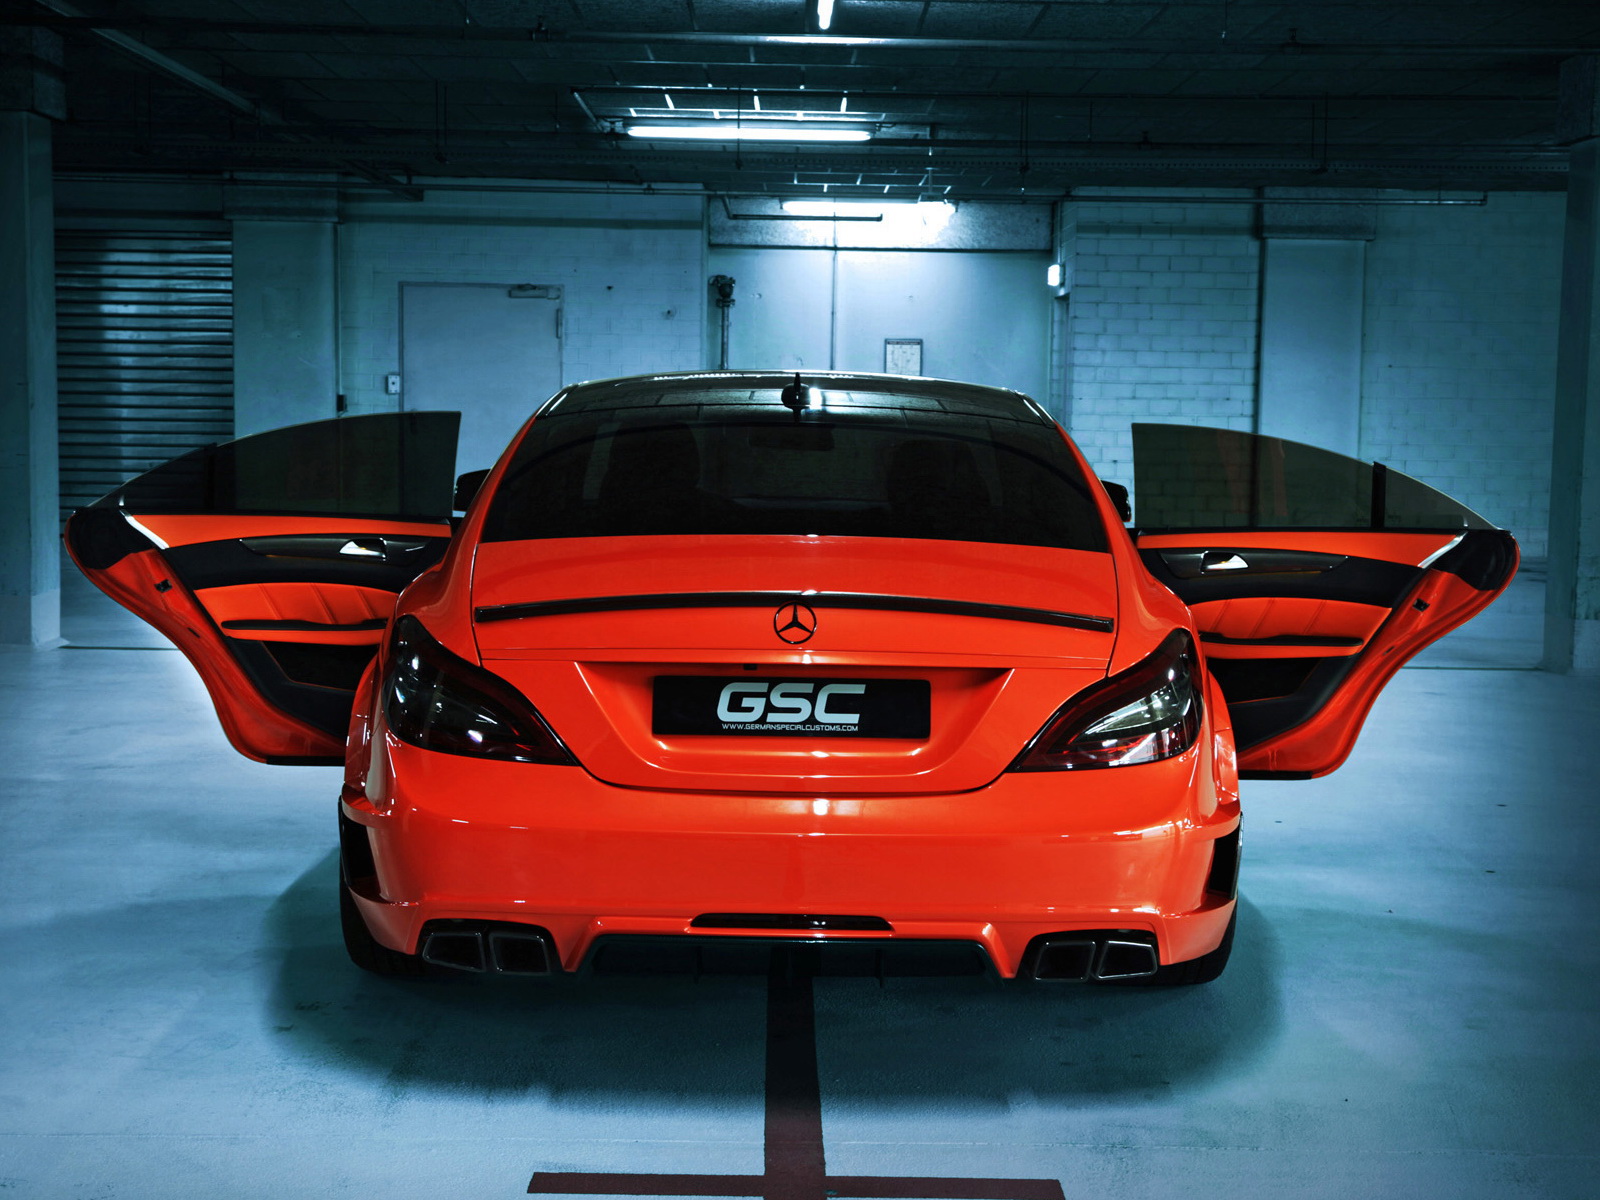 2013, Gsc, Mercedes, Benz, Cls63, Amg, Stealth, B s,  c218 , Tuning Wallpaper